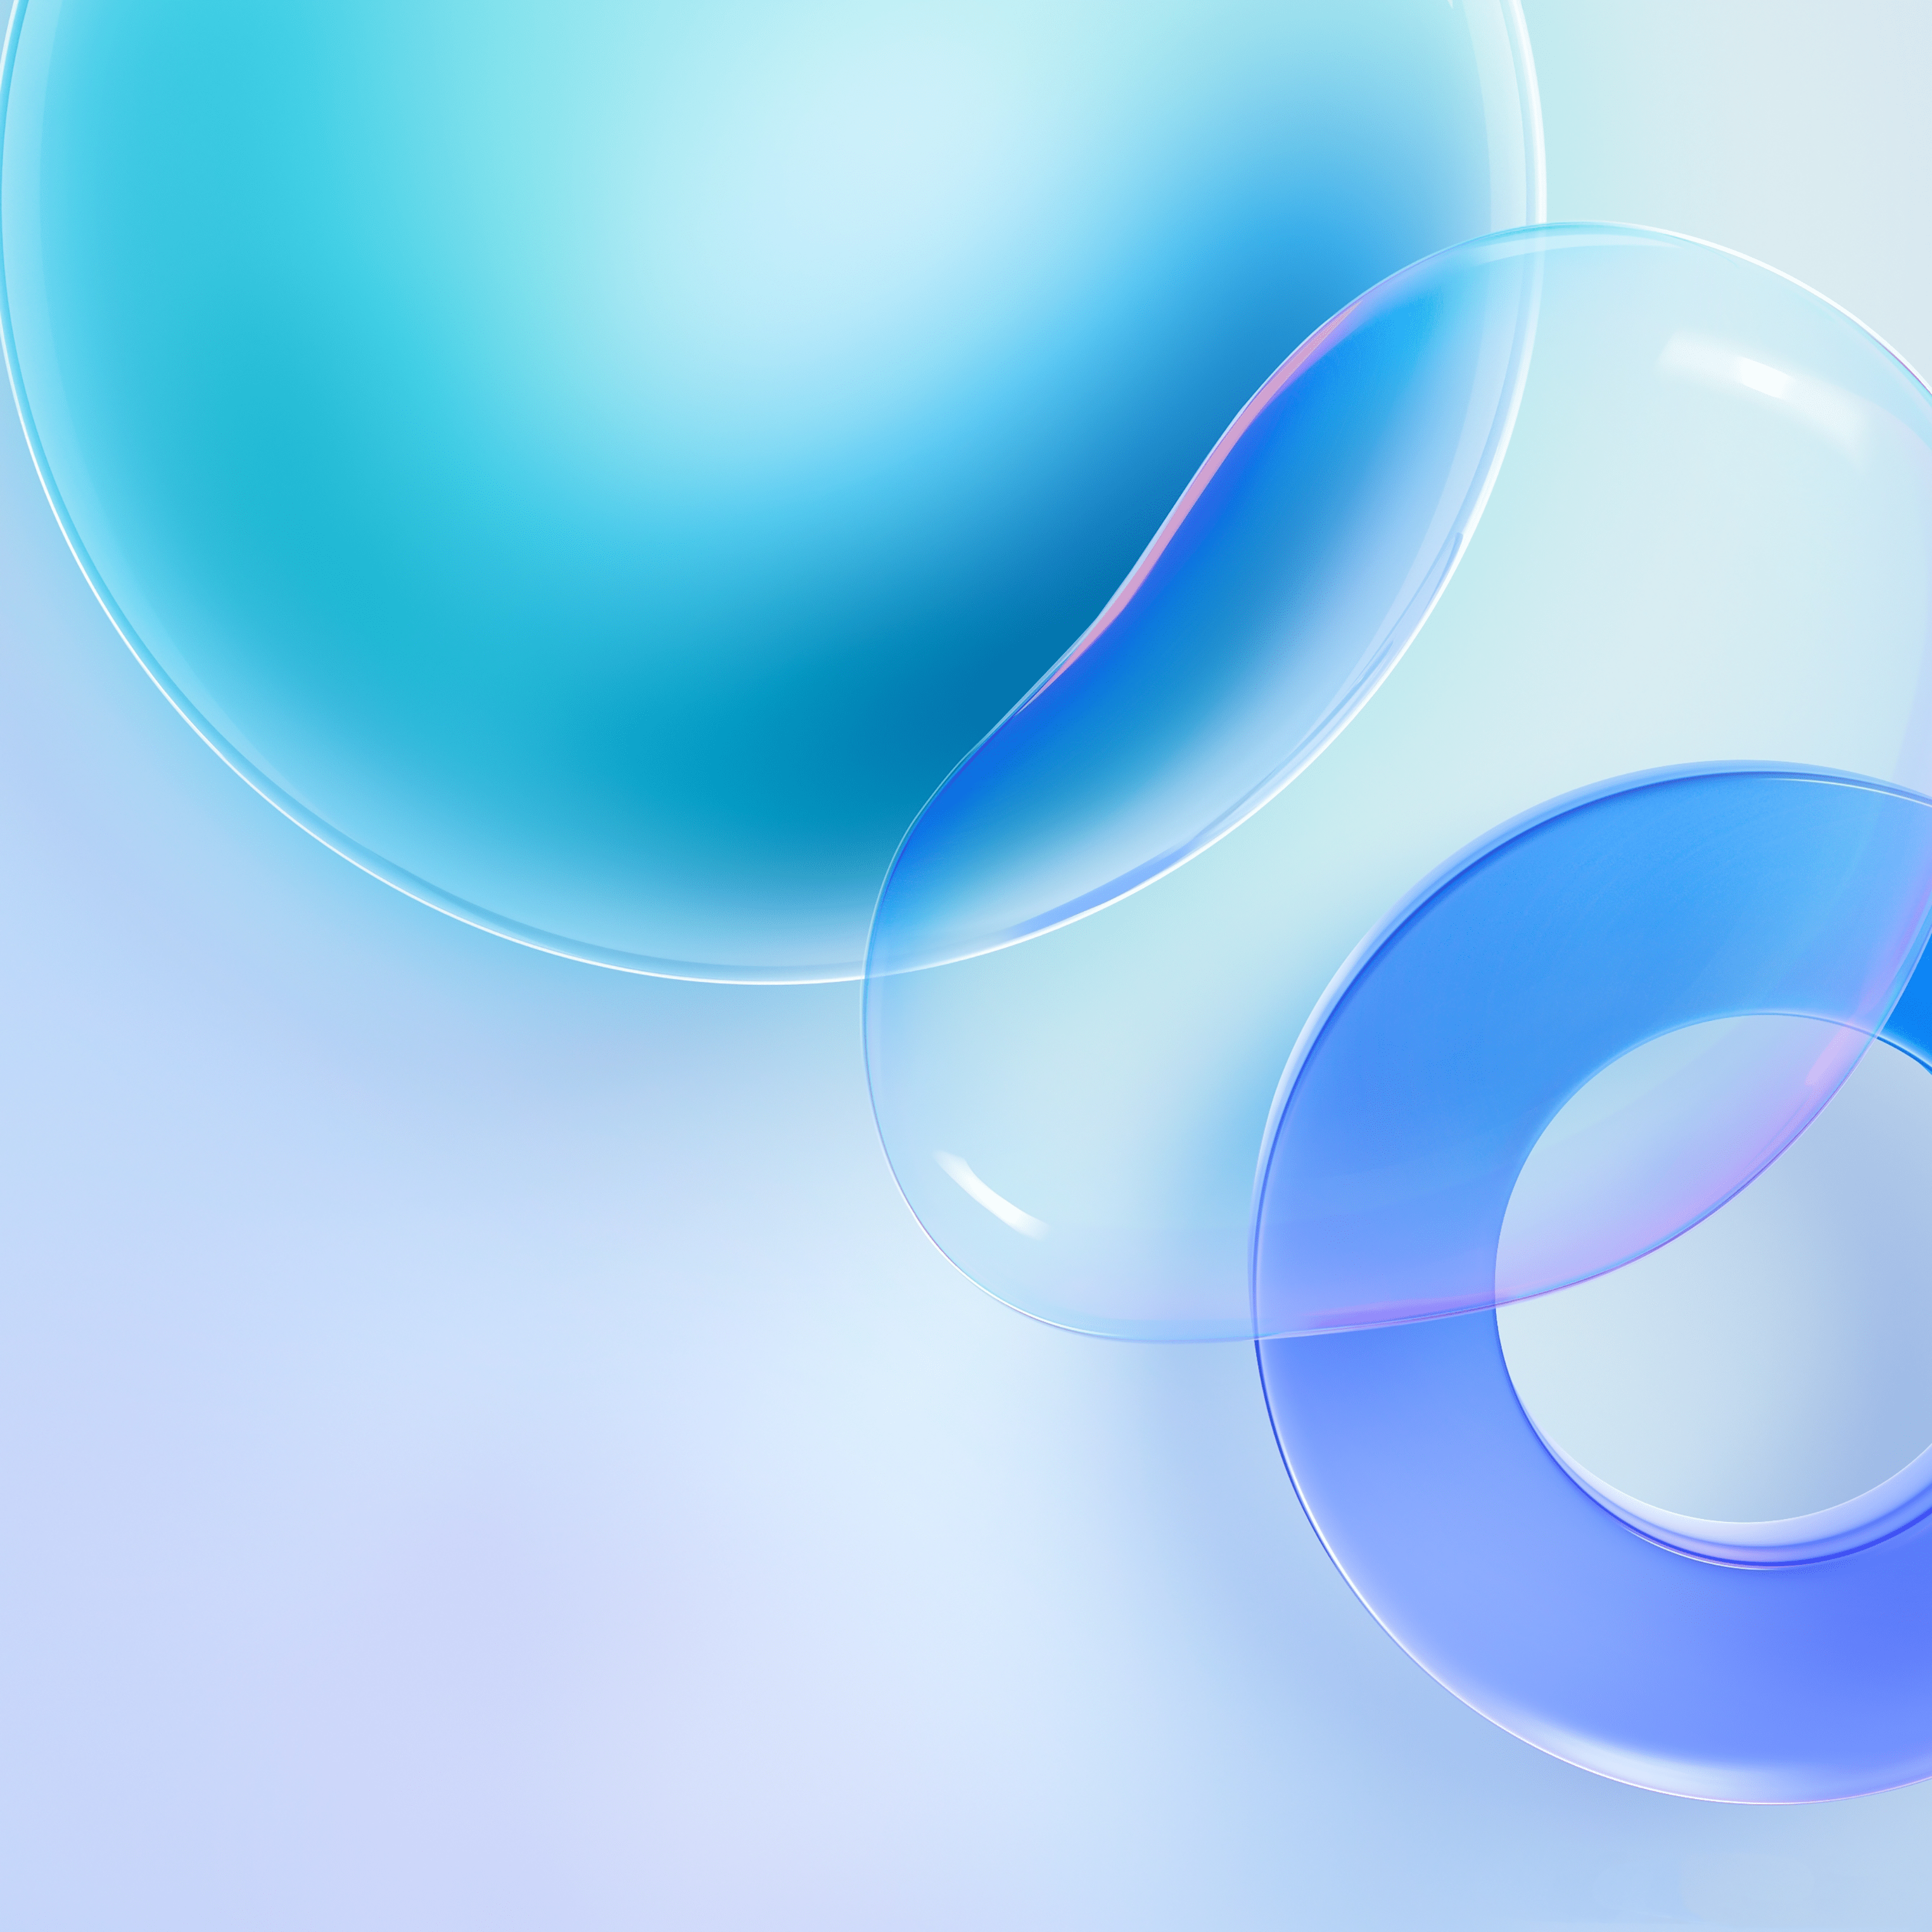 A blue and purple background with circles - Bubbles